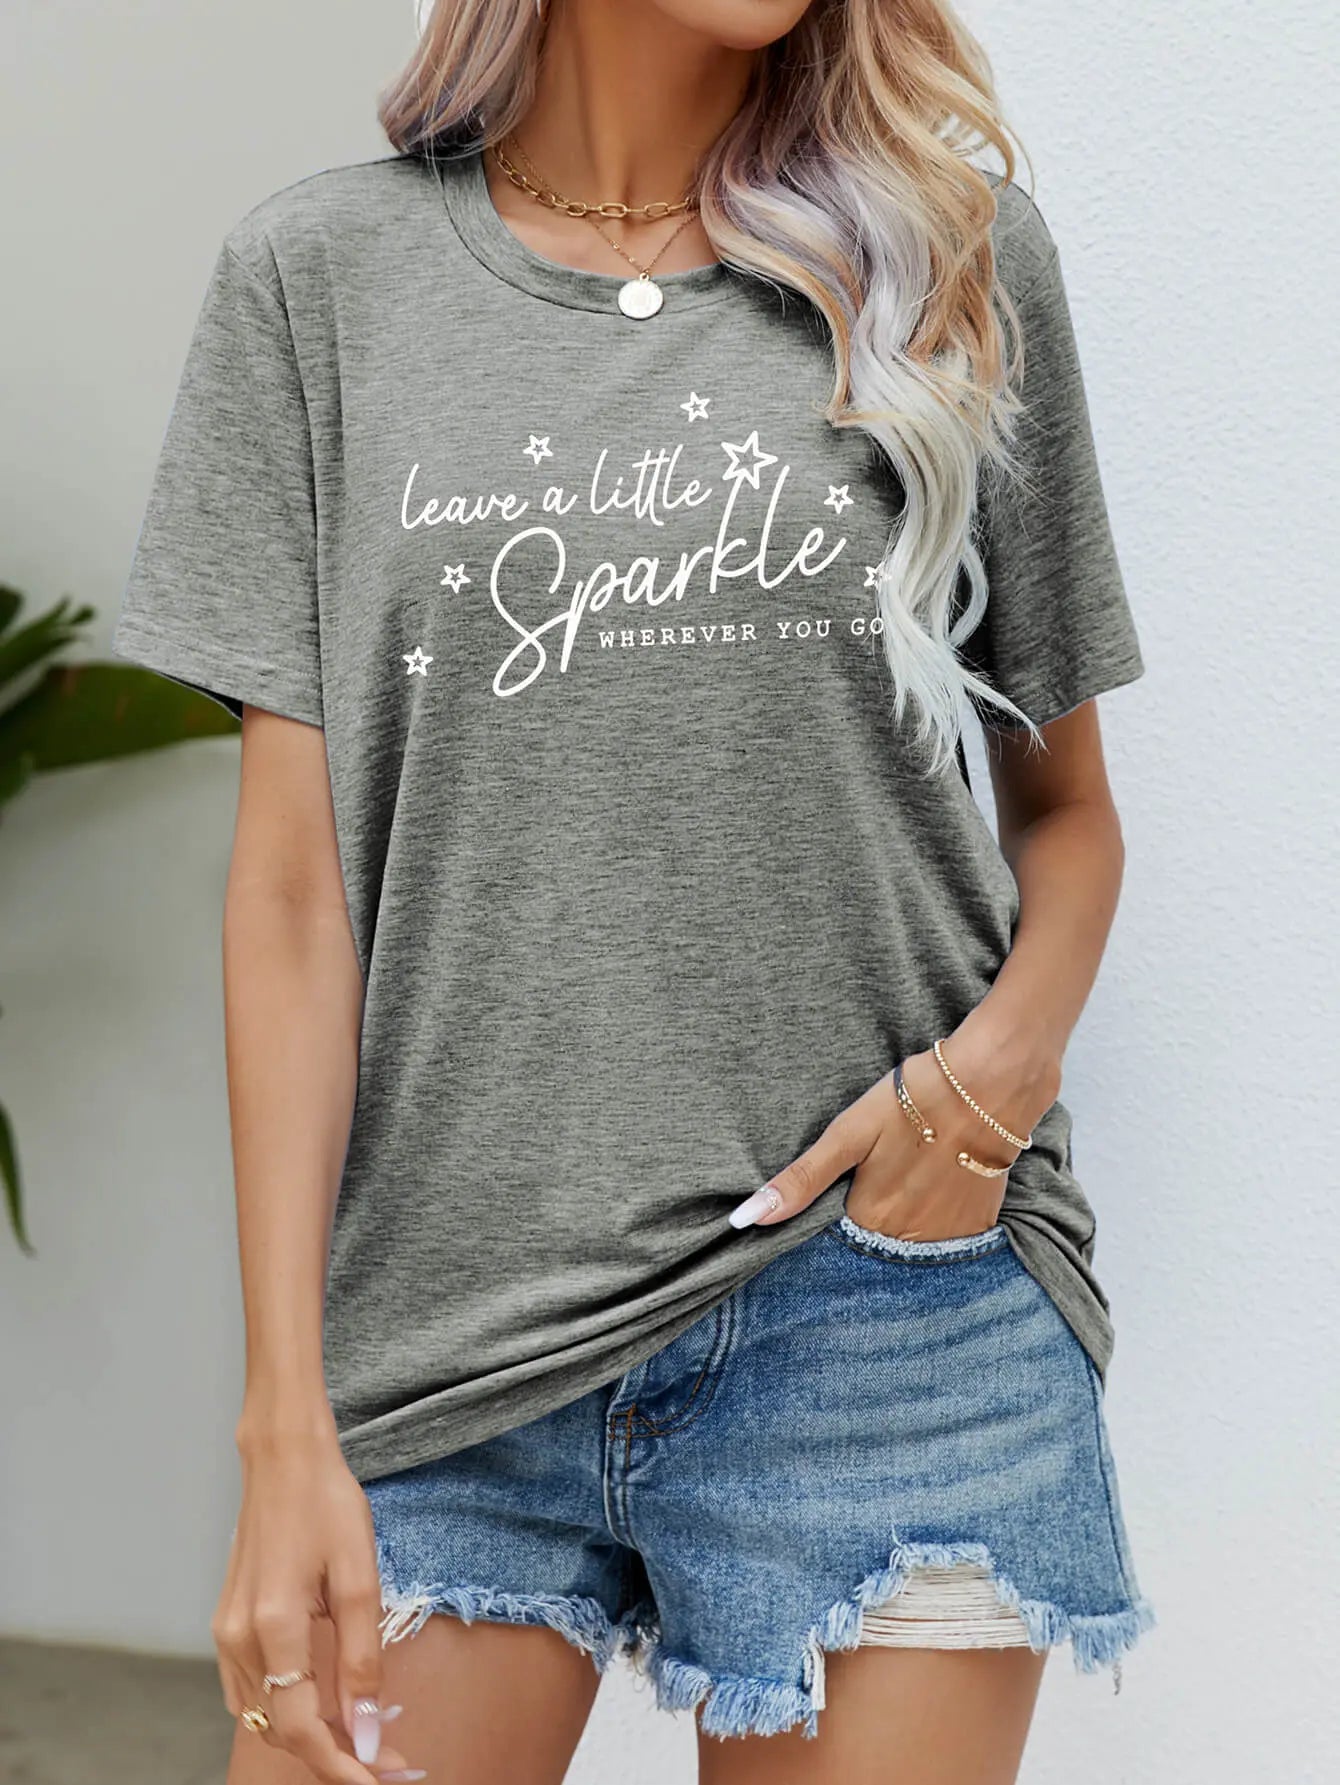 LEAVE A LITTLE SPARKLE WHEREVER YOU GO Tee Shirt - Image #19